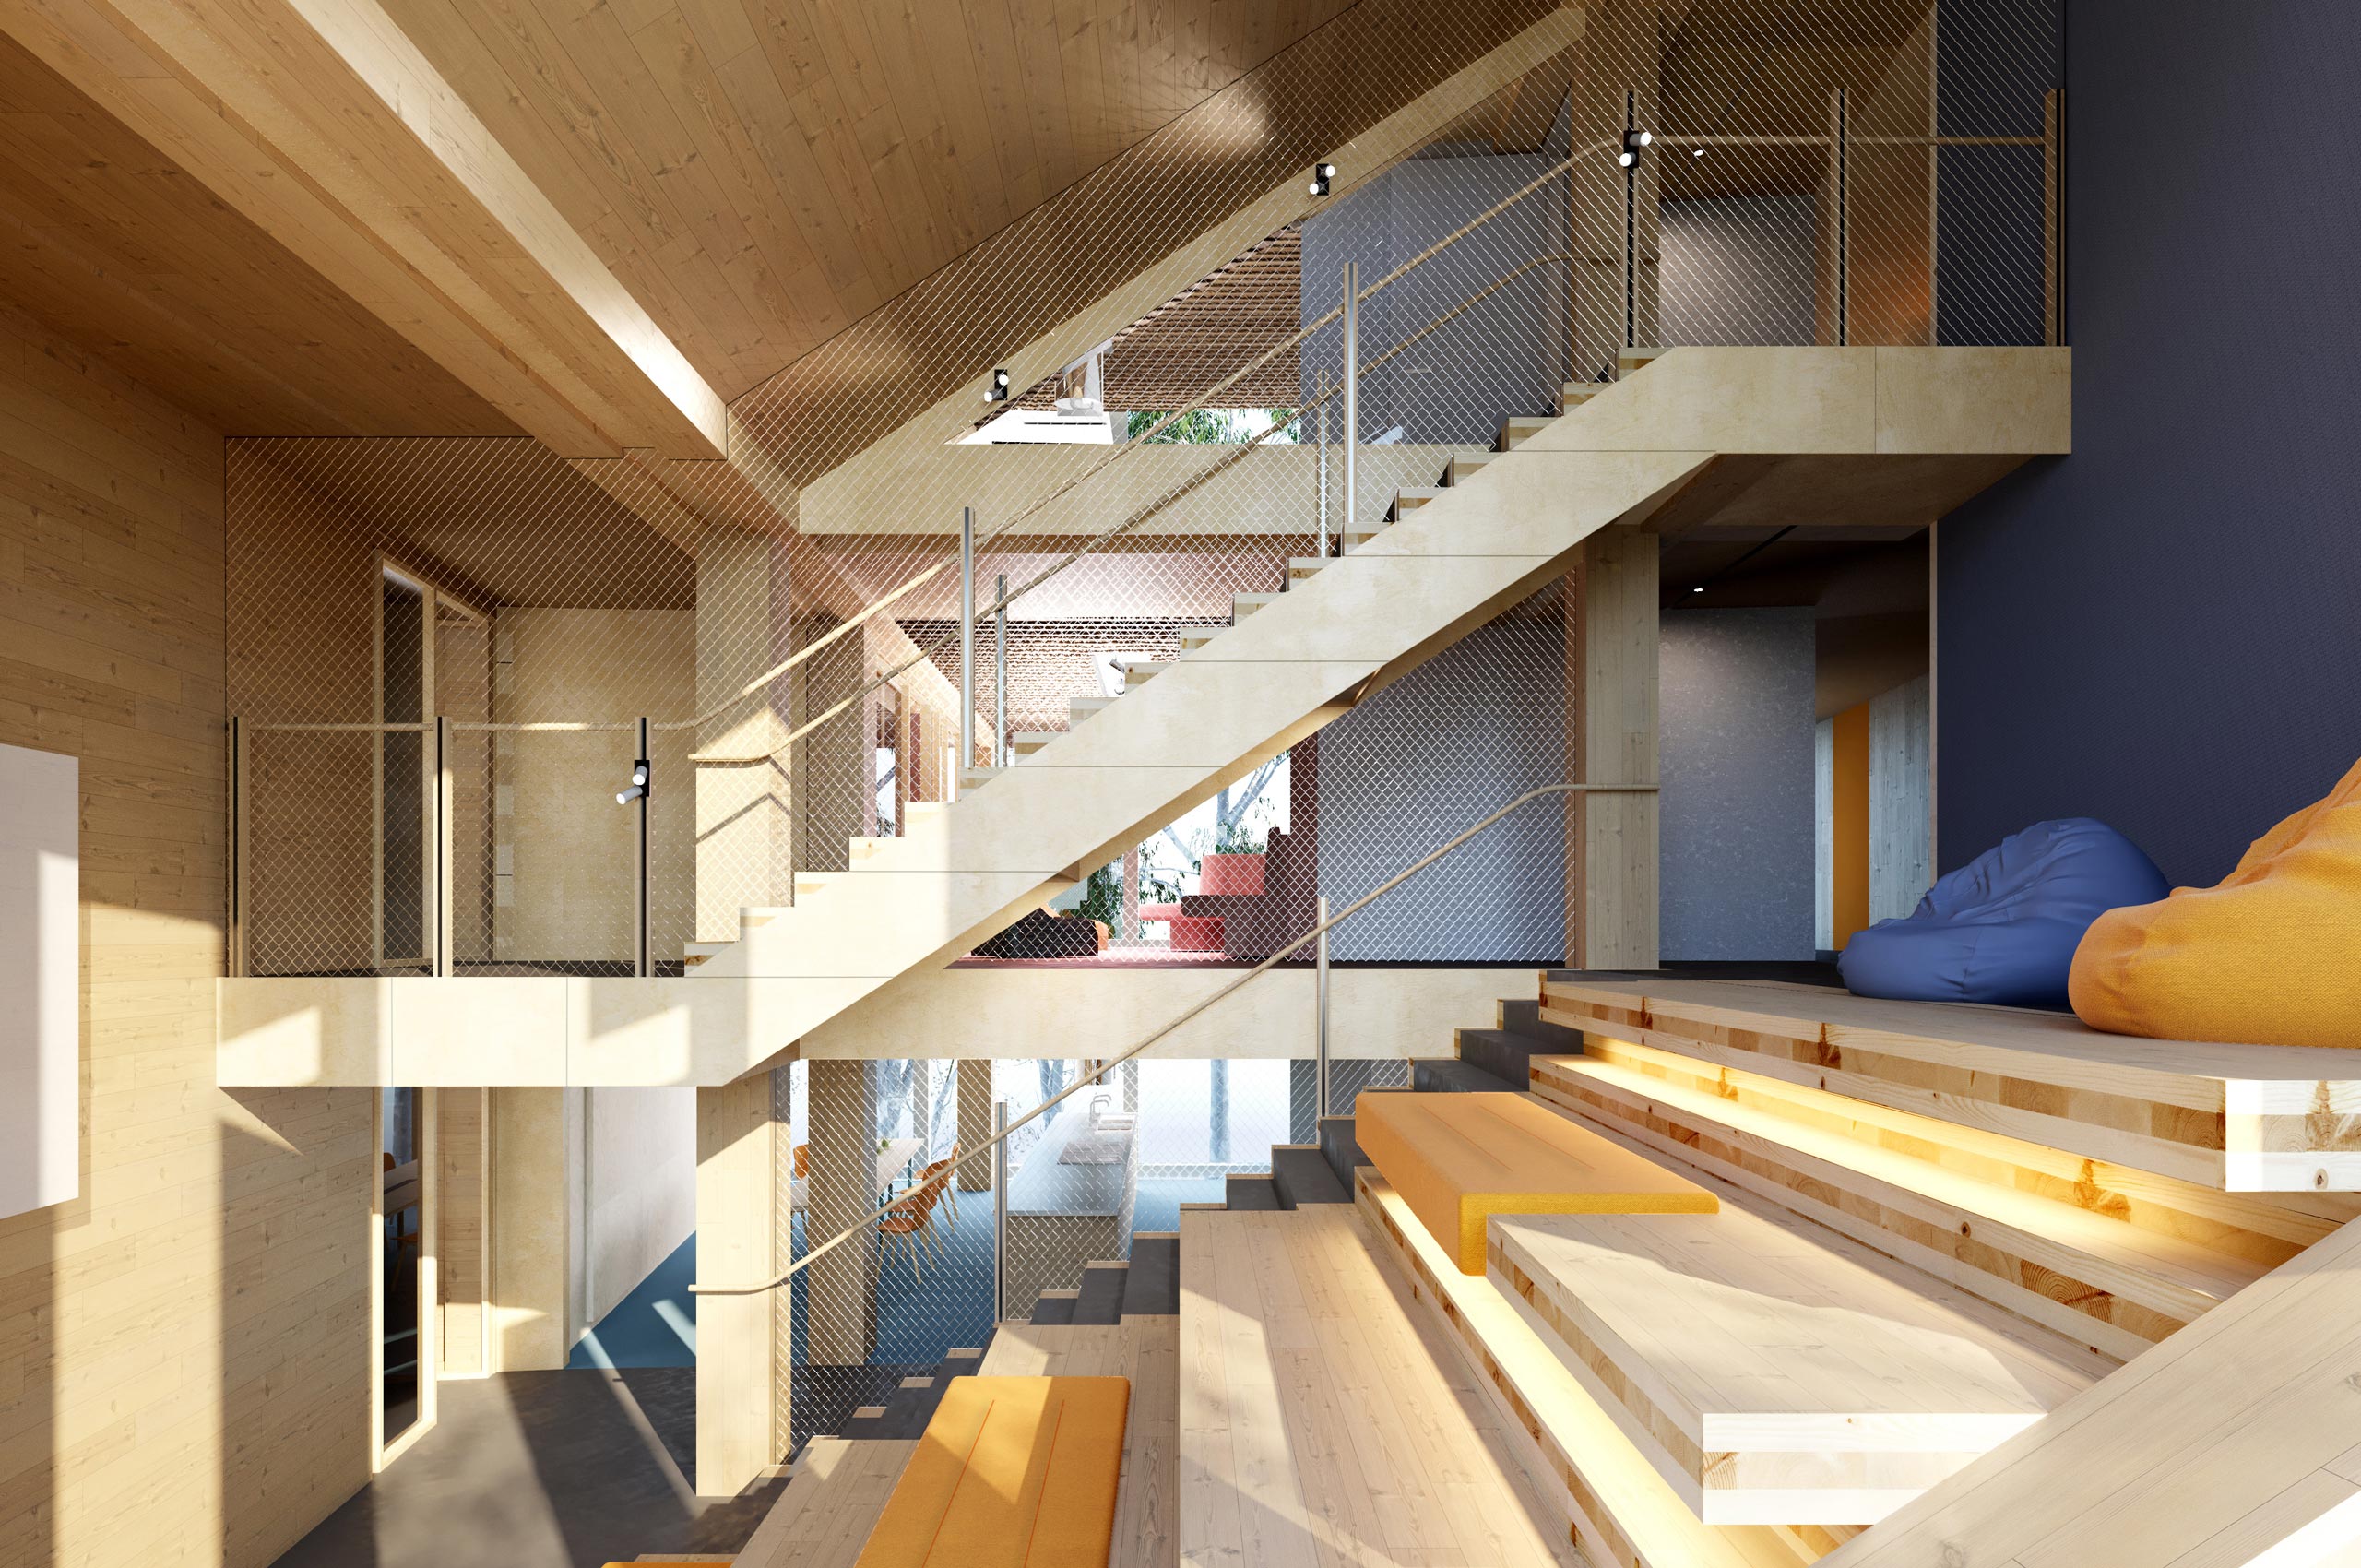 Concept art of stairwells and communal spaces within the building. [Architect: Jackson Clement Burrows.]